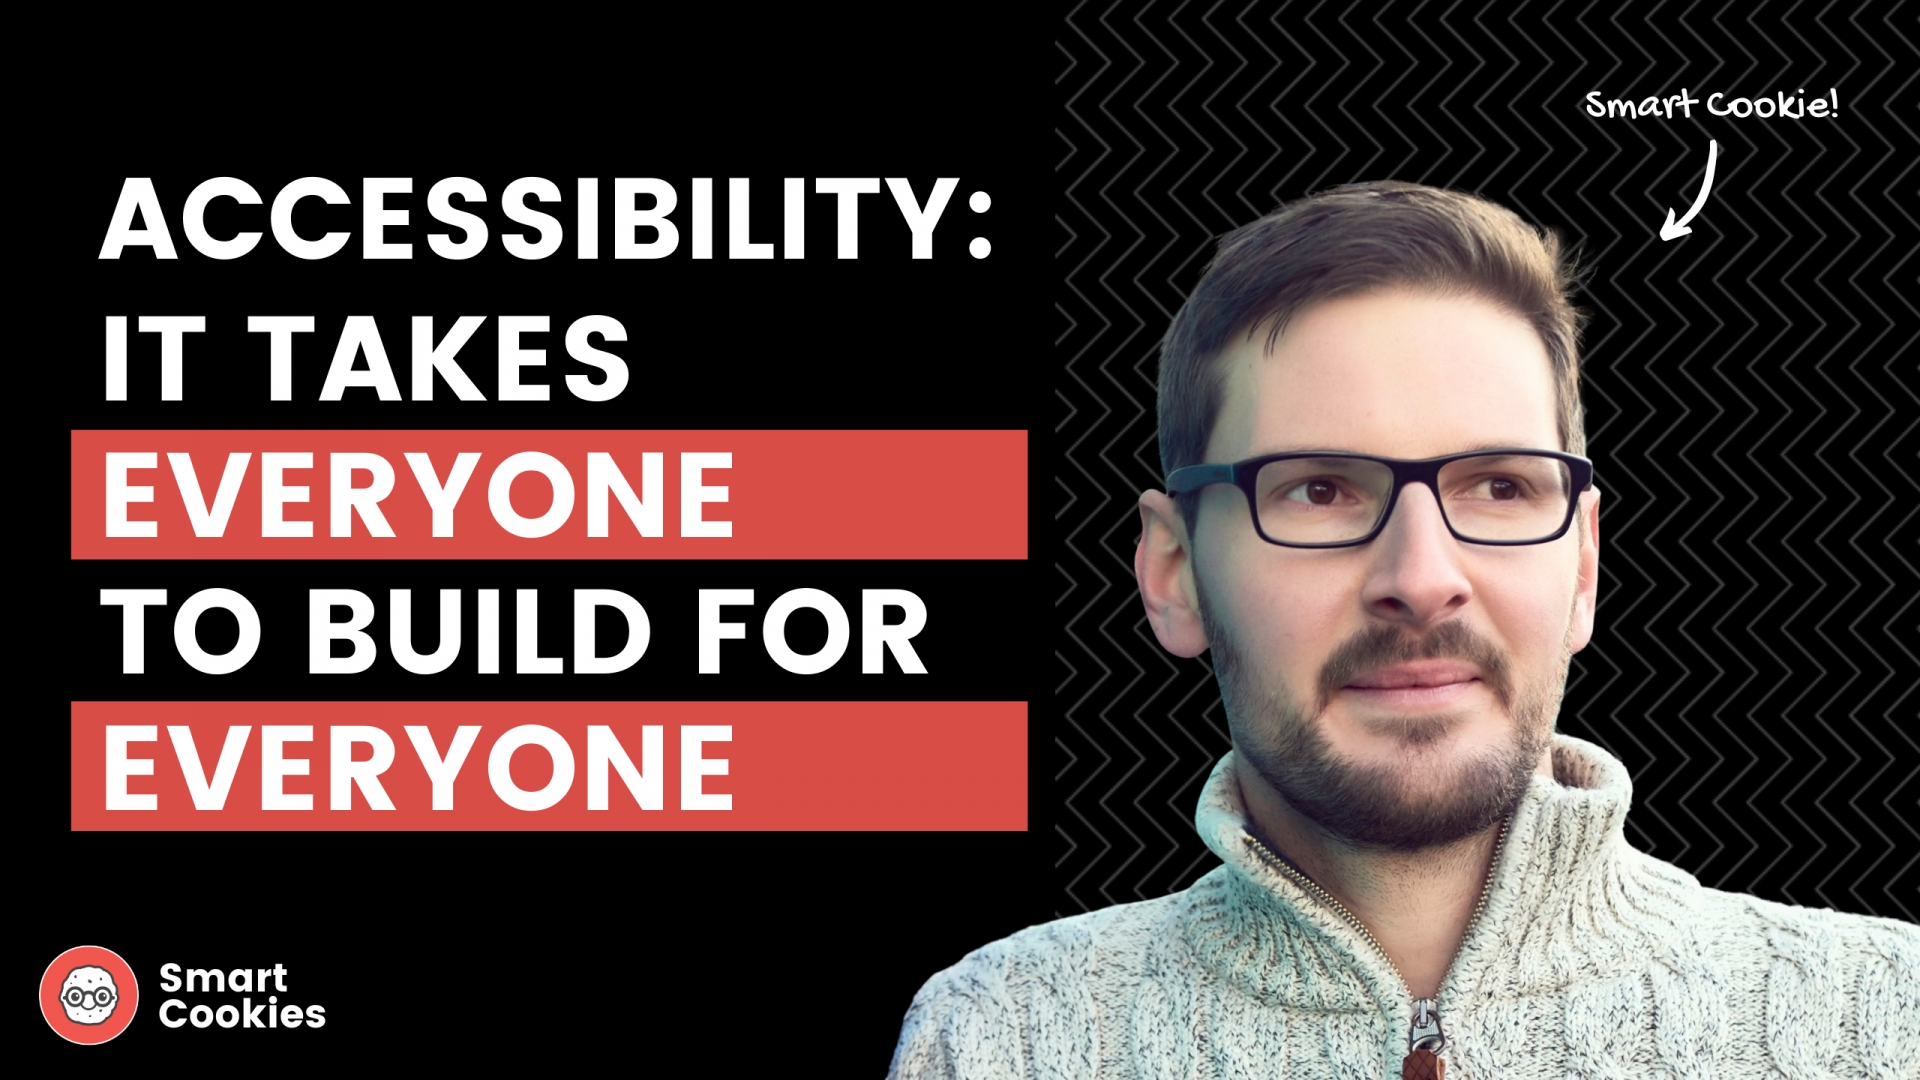 Romaric next to text: Accessibility - It takes everyone to build for everyone